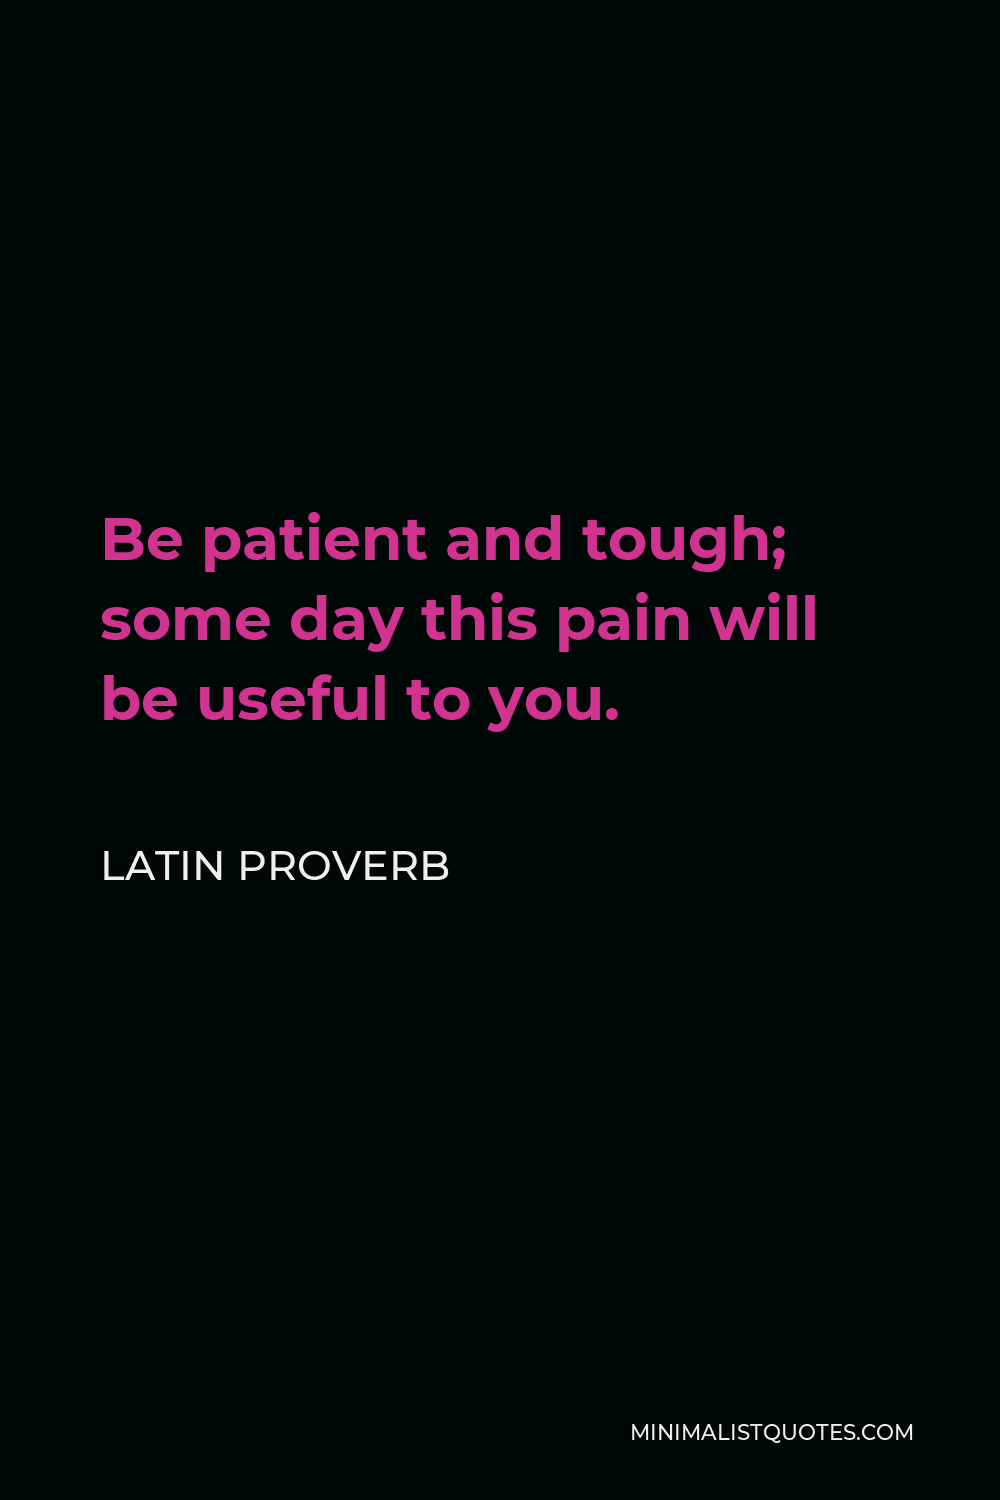 Latin Proverb Quote - Be patient and tough; some day this pain will be useful to you.